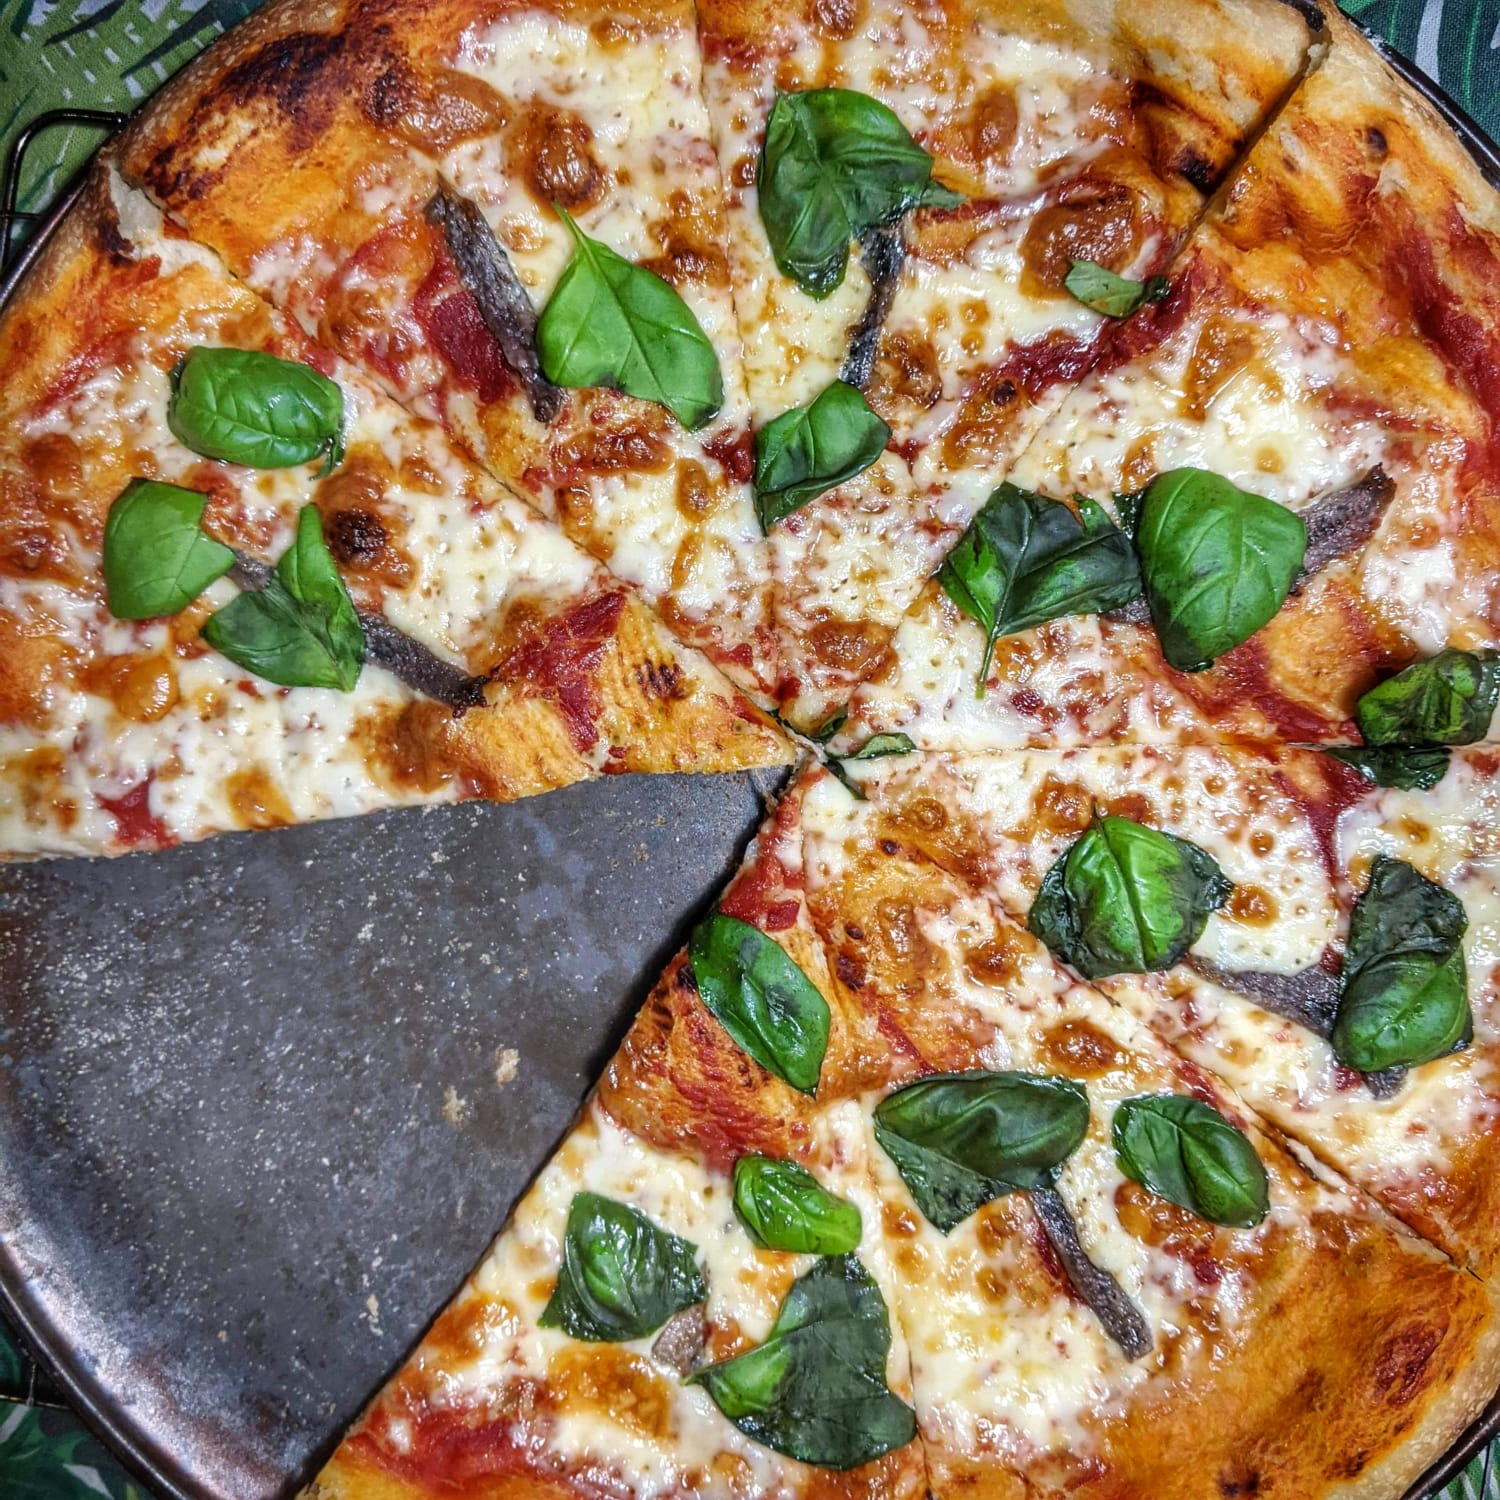 My pie from last night. Anchovies and fresh basil. It was very very good.